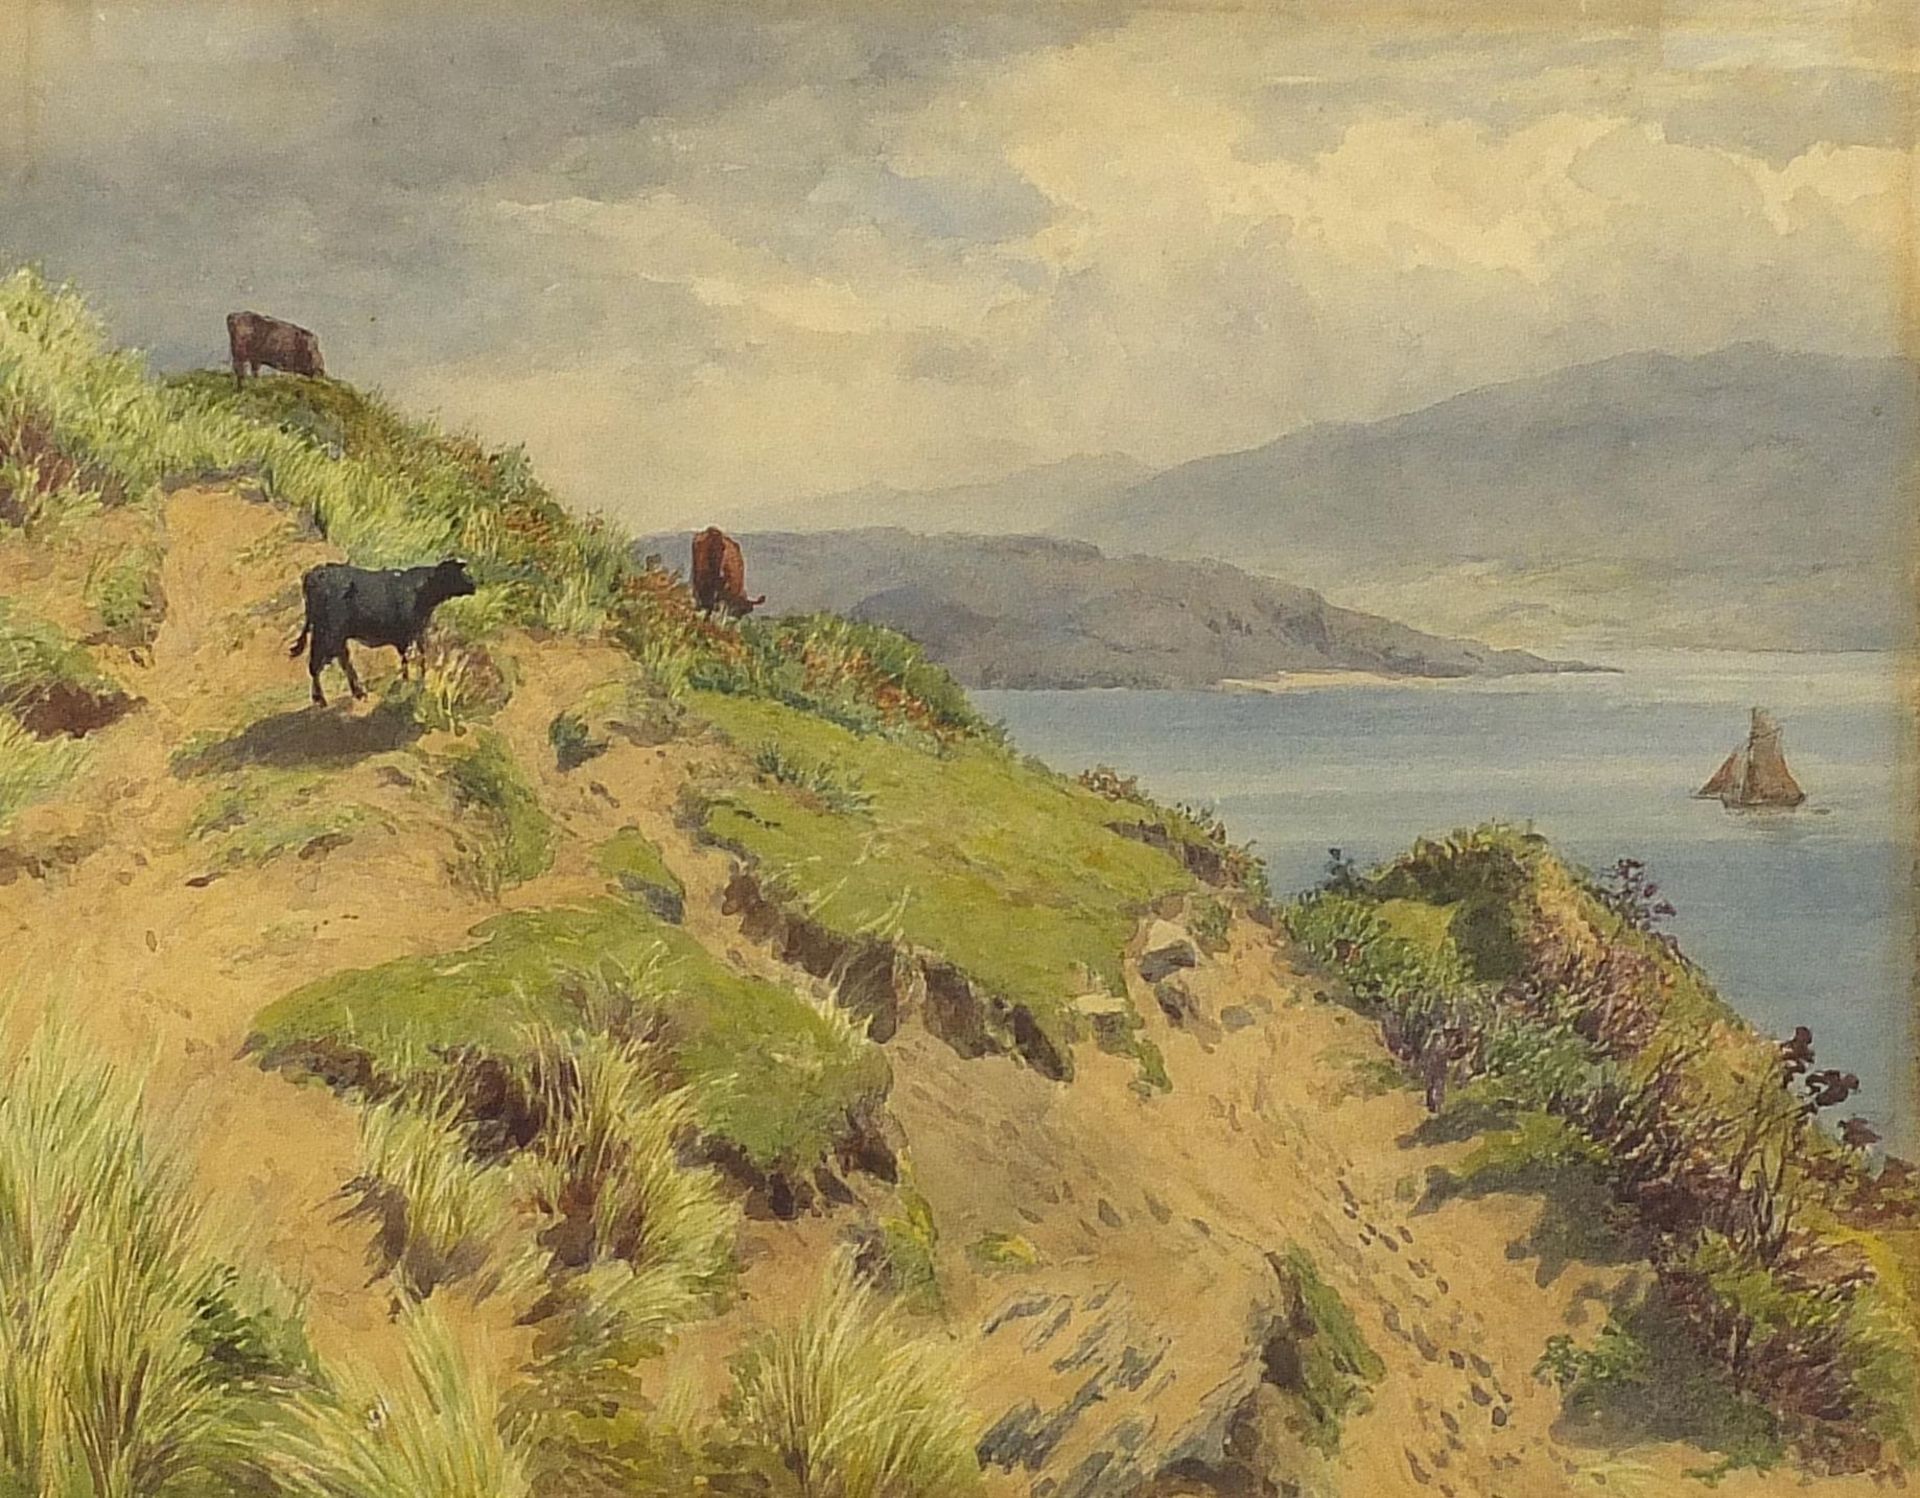 Charles Davidson - Scottish Highland landscape with cattle grazing before a loch, 19th century